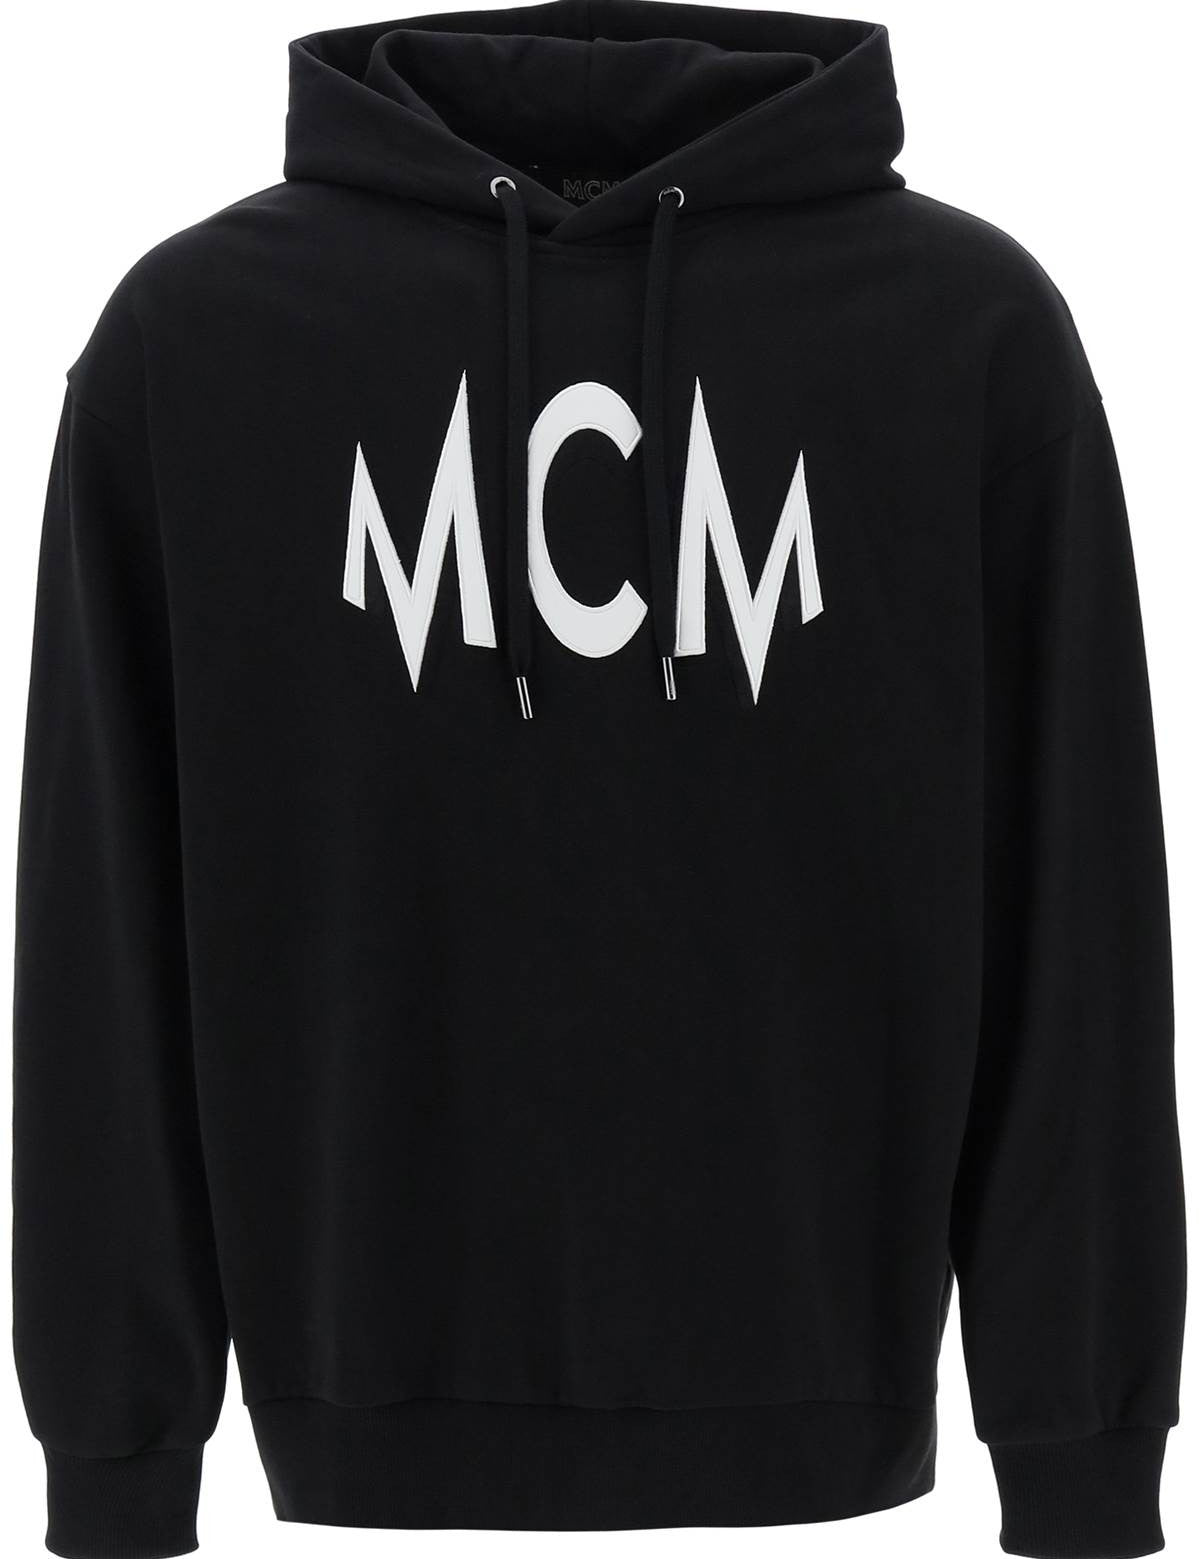 mcm-hoodie-with-logo-patch-and-back-floral-print.jpg